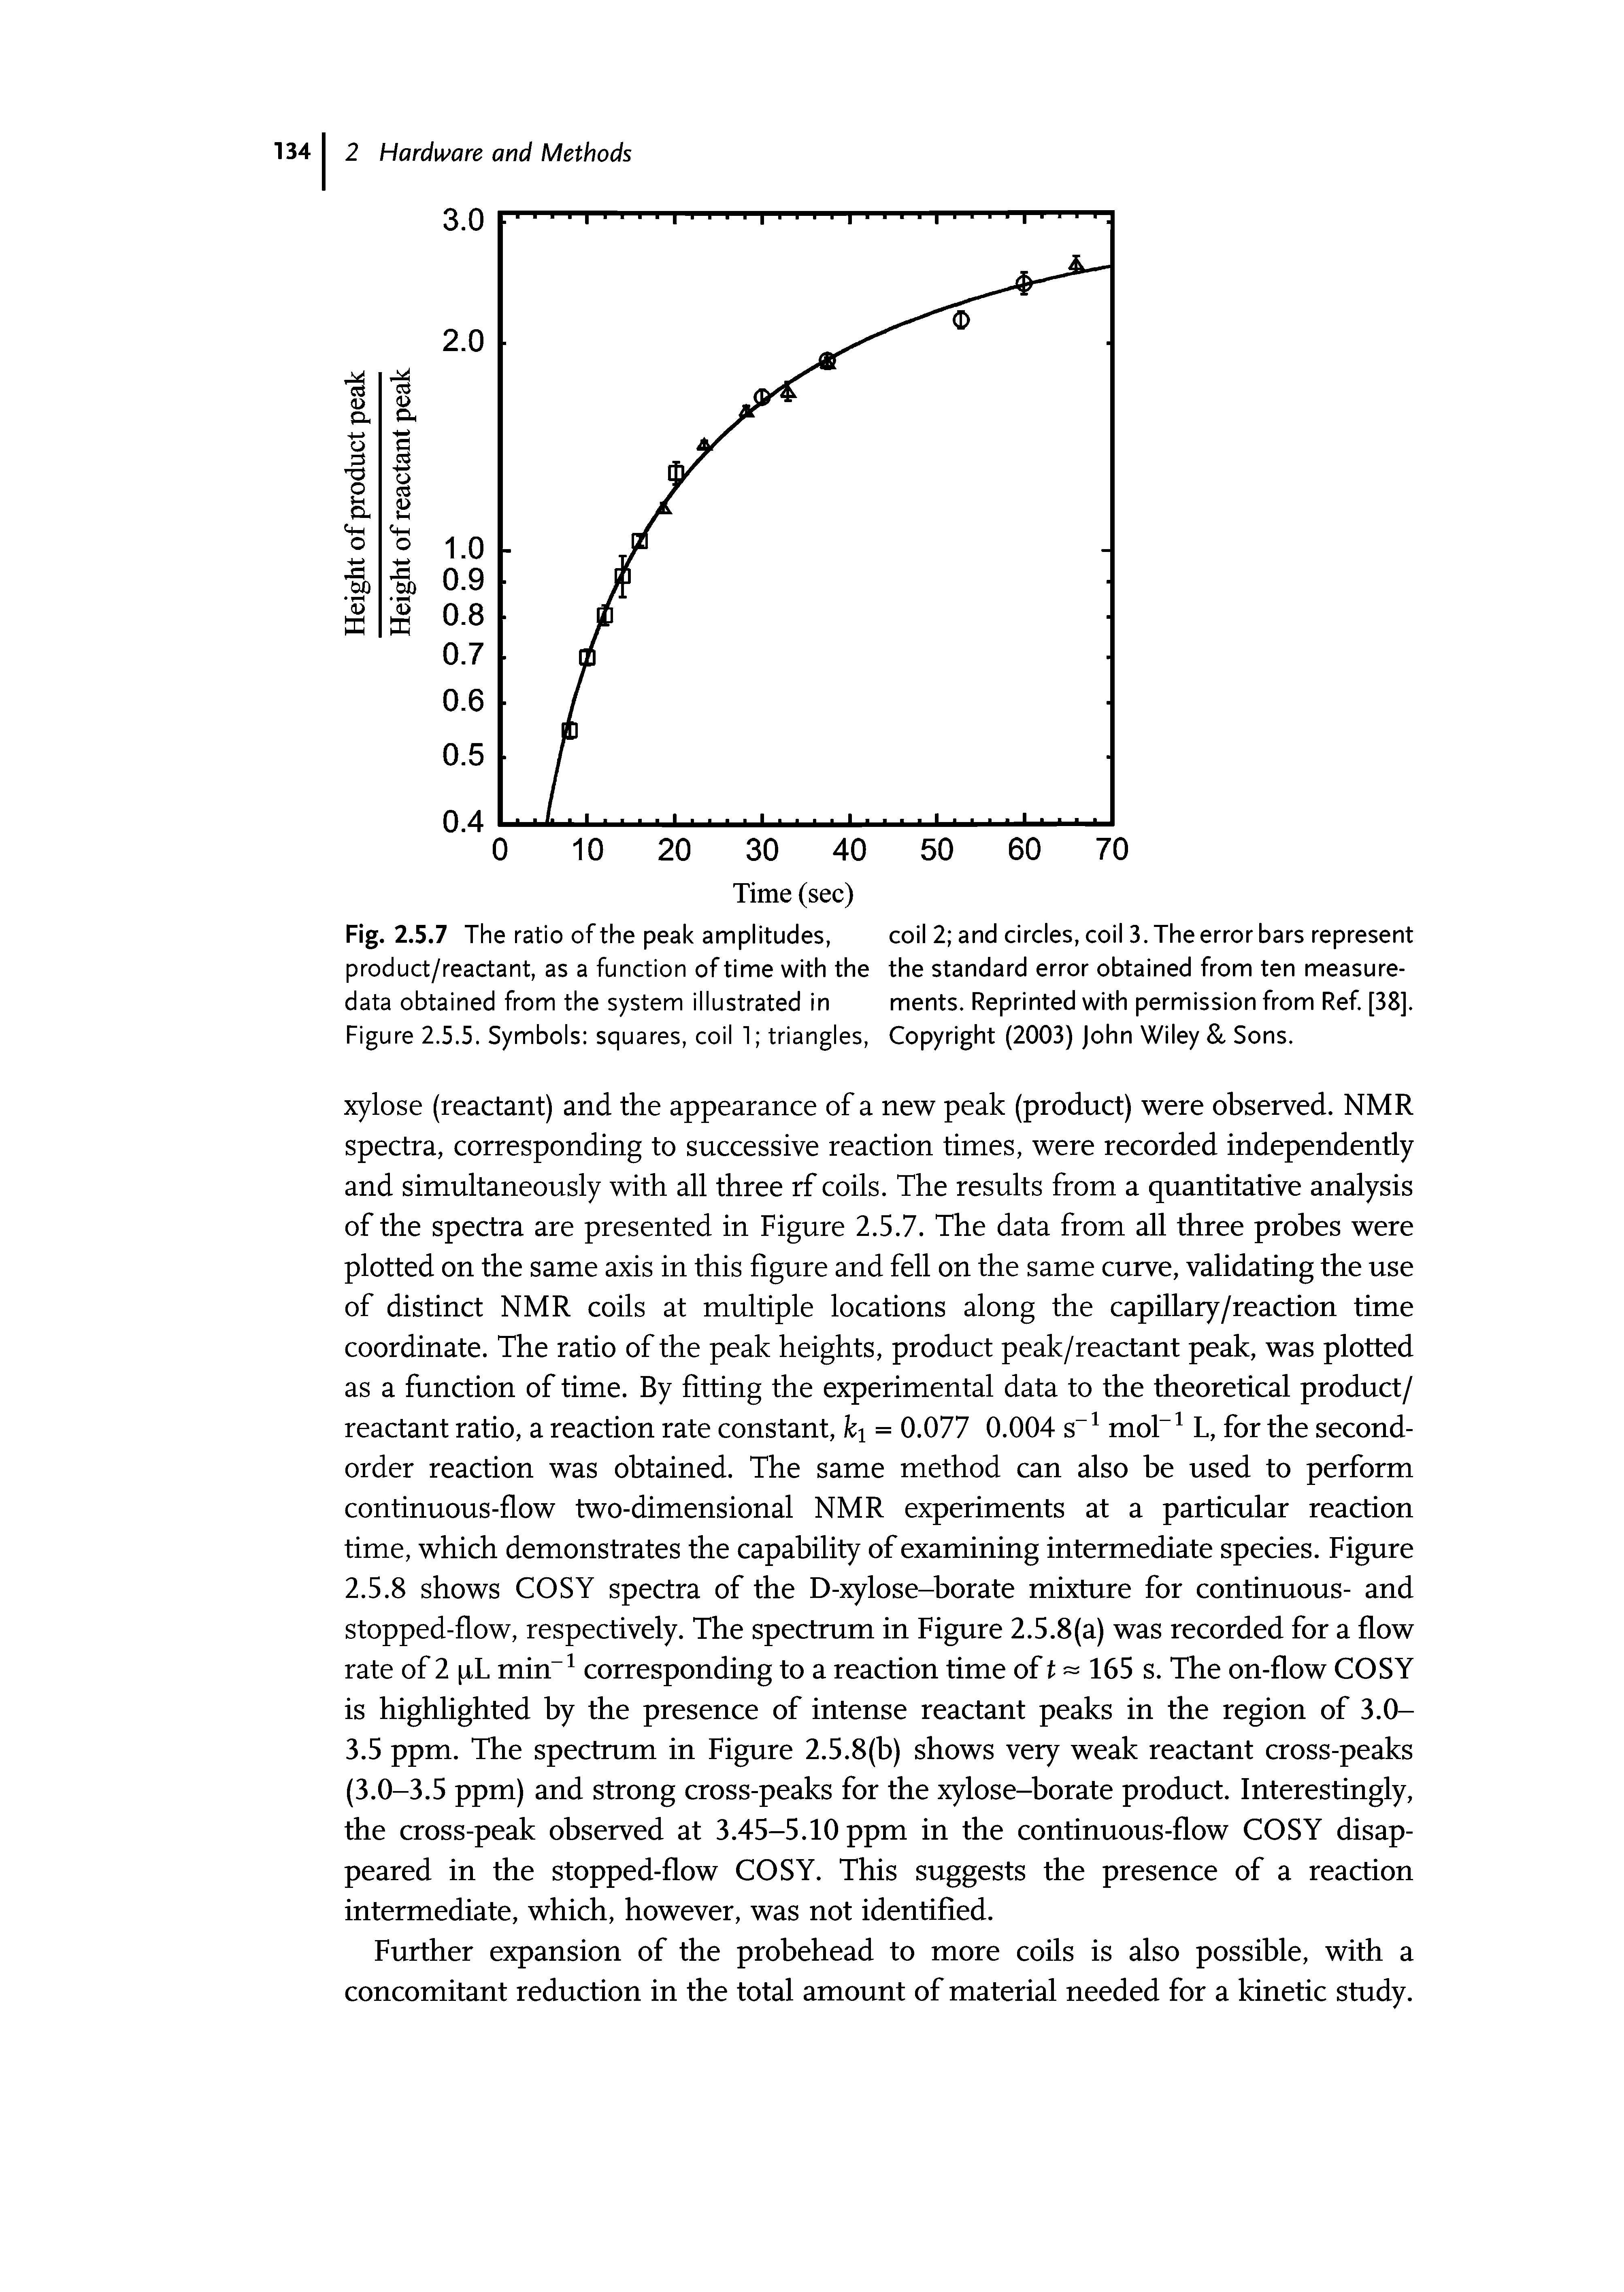 Fig. 2.5.7 The ratio of the peak amplitudes, product/reactant, as a function of time with the data obtained from the system illustrated in Figure 2.5.5. Symbols squares, coil 1 triangles,...